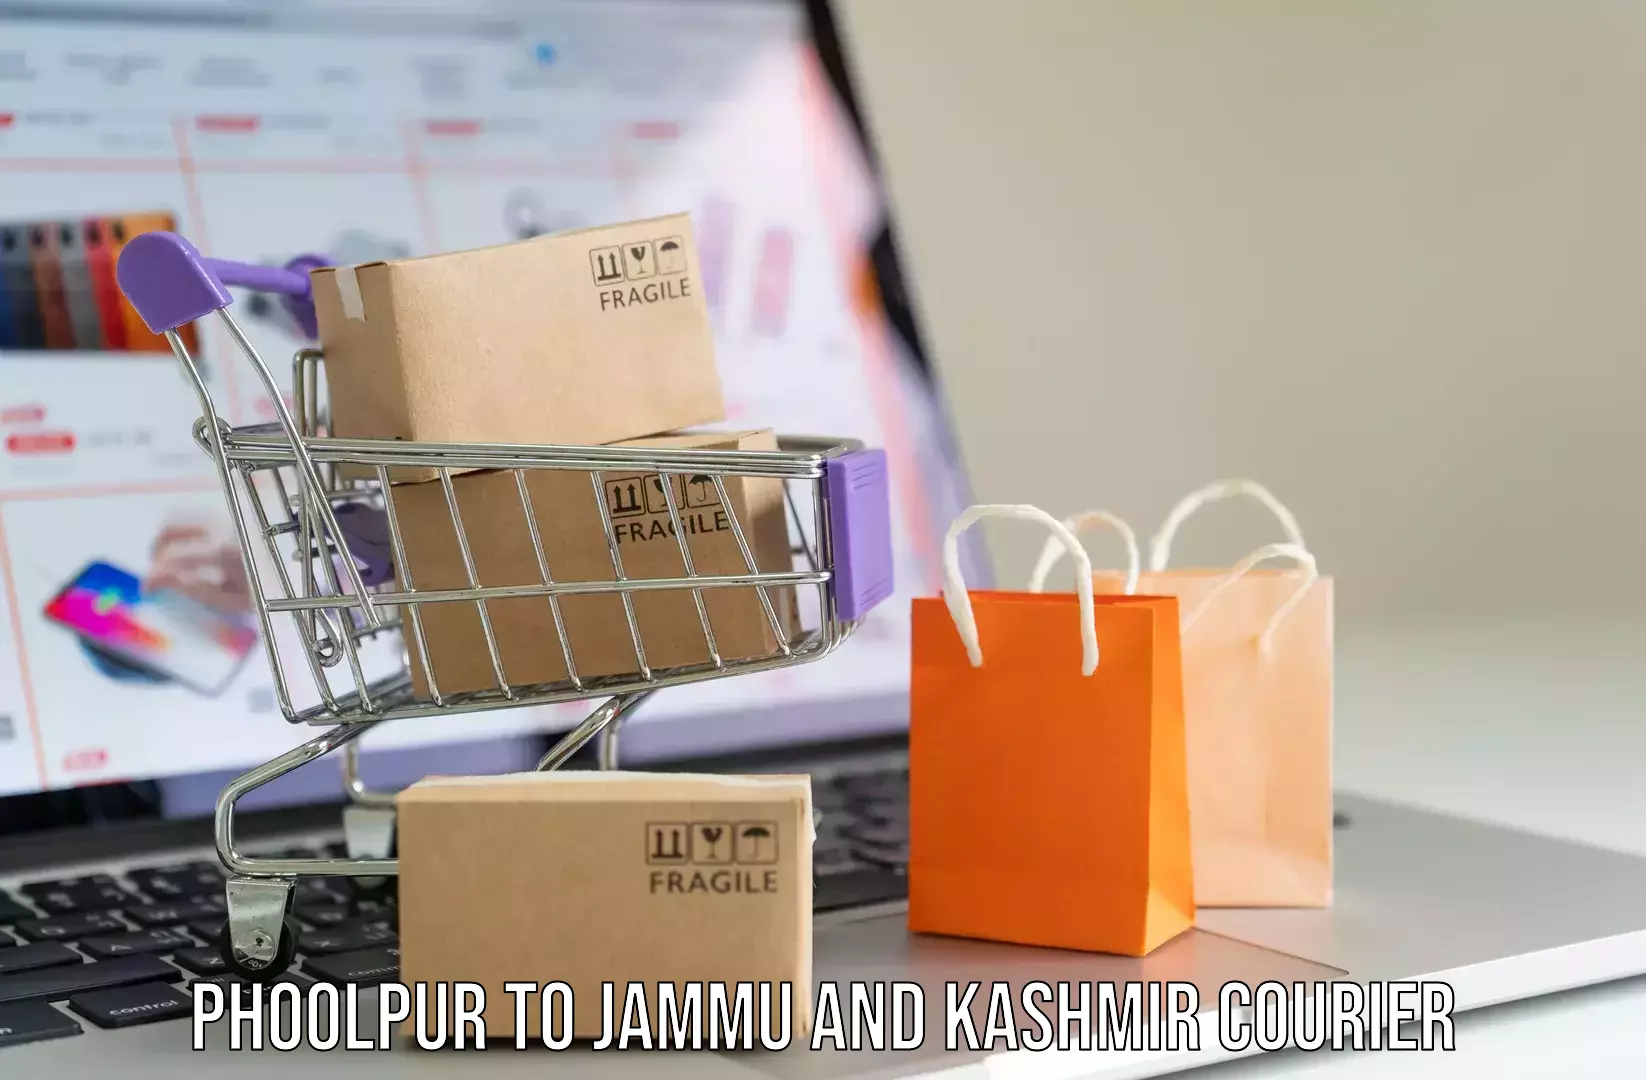 Personal luggage delivery in Phoolpur to Jammu and Kashmir